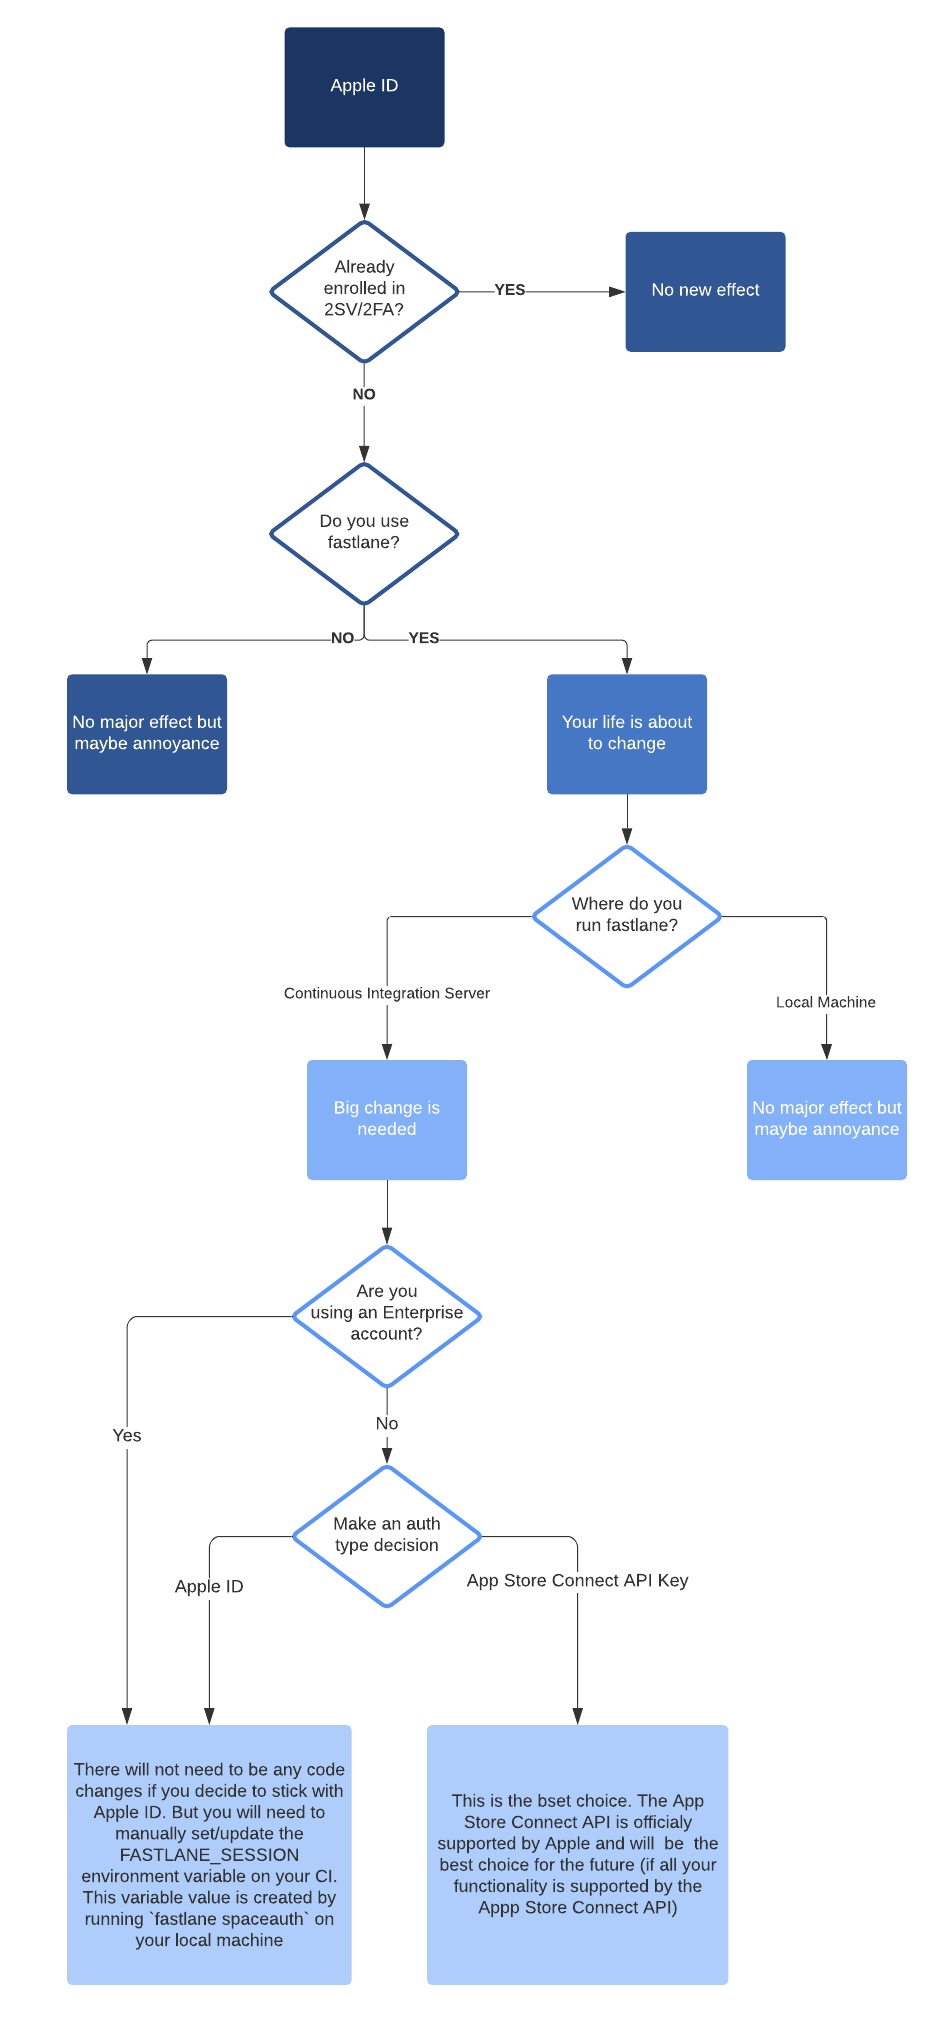 Flowchart for seeing how Apple ID affects you